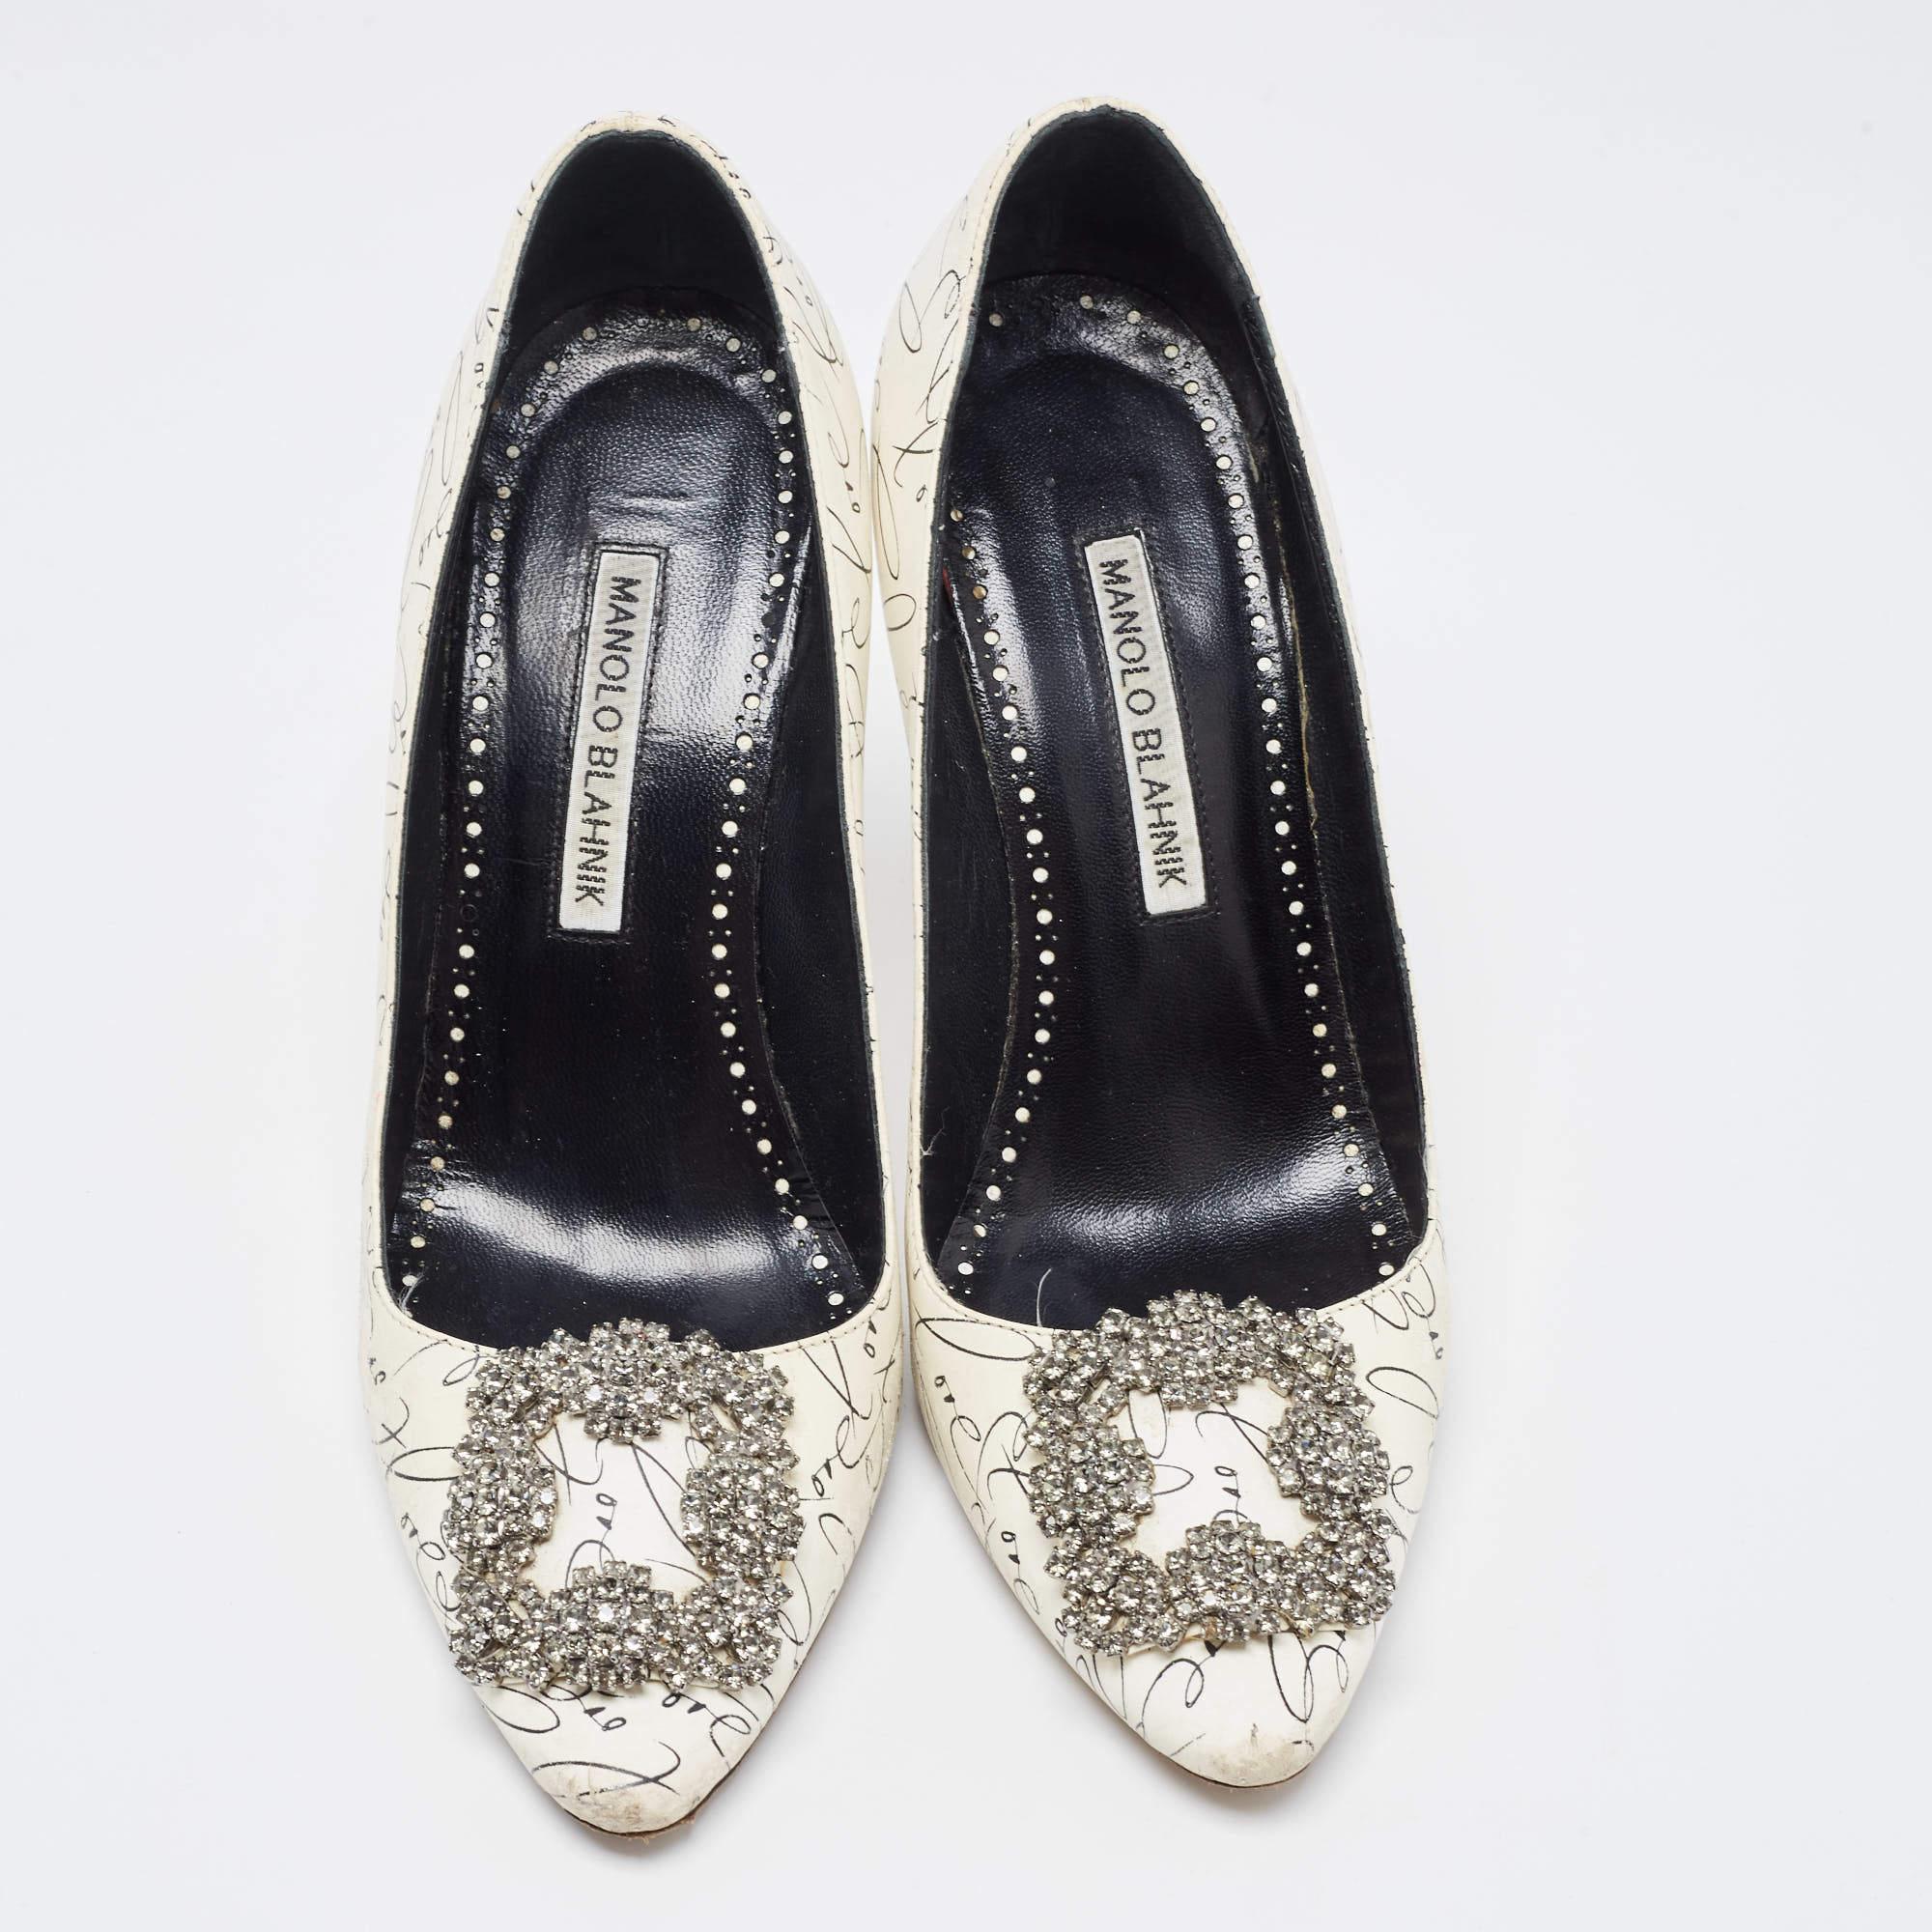 Women's Manolo Blahnik White/Black Leather Crystal Embellished Pointed Toe Pumps